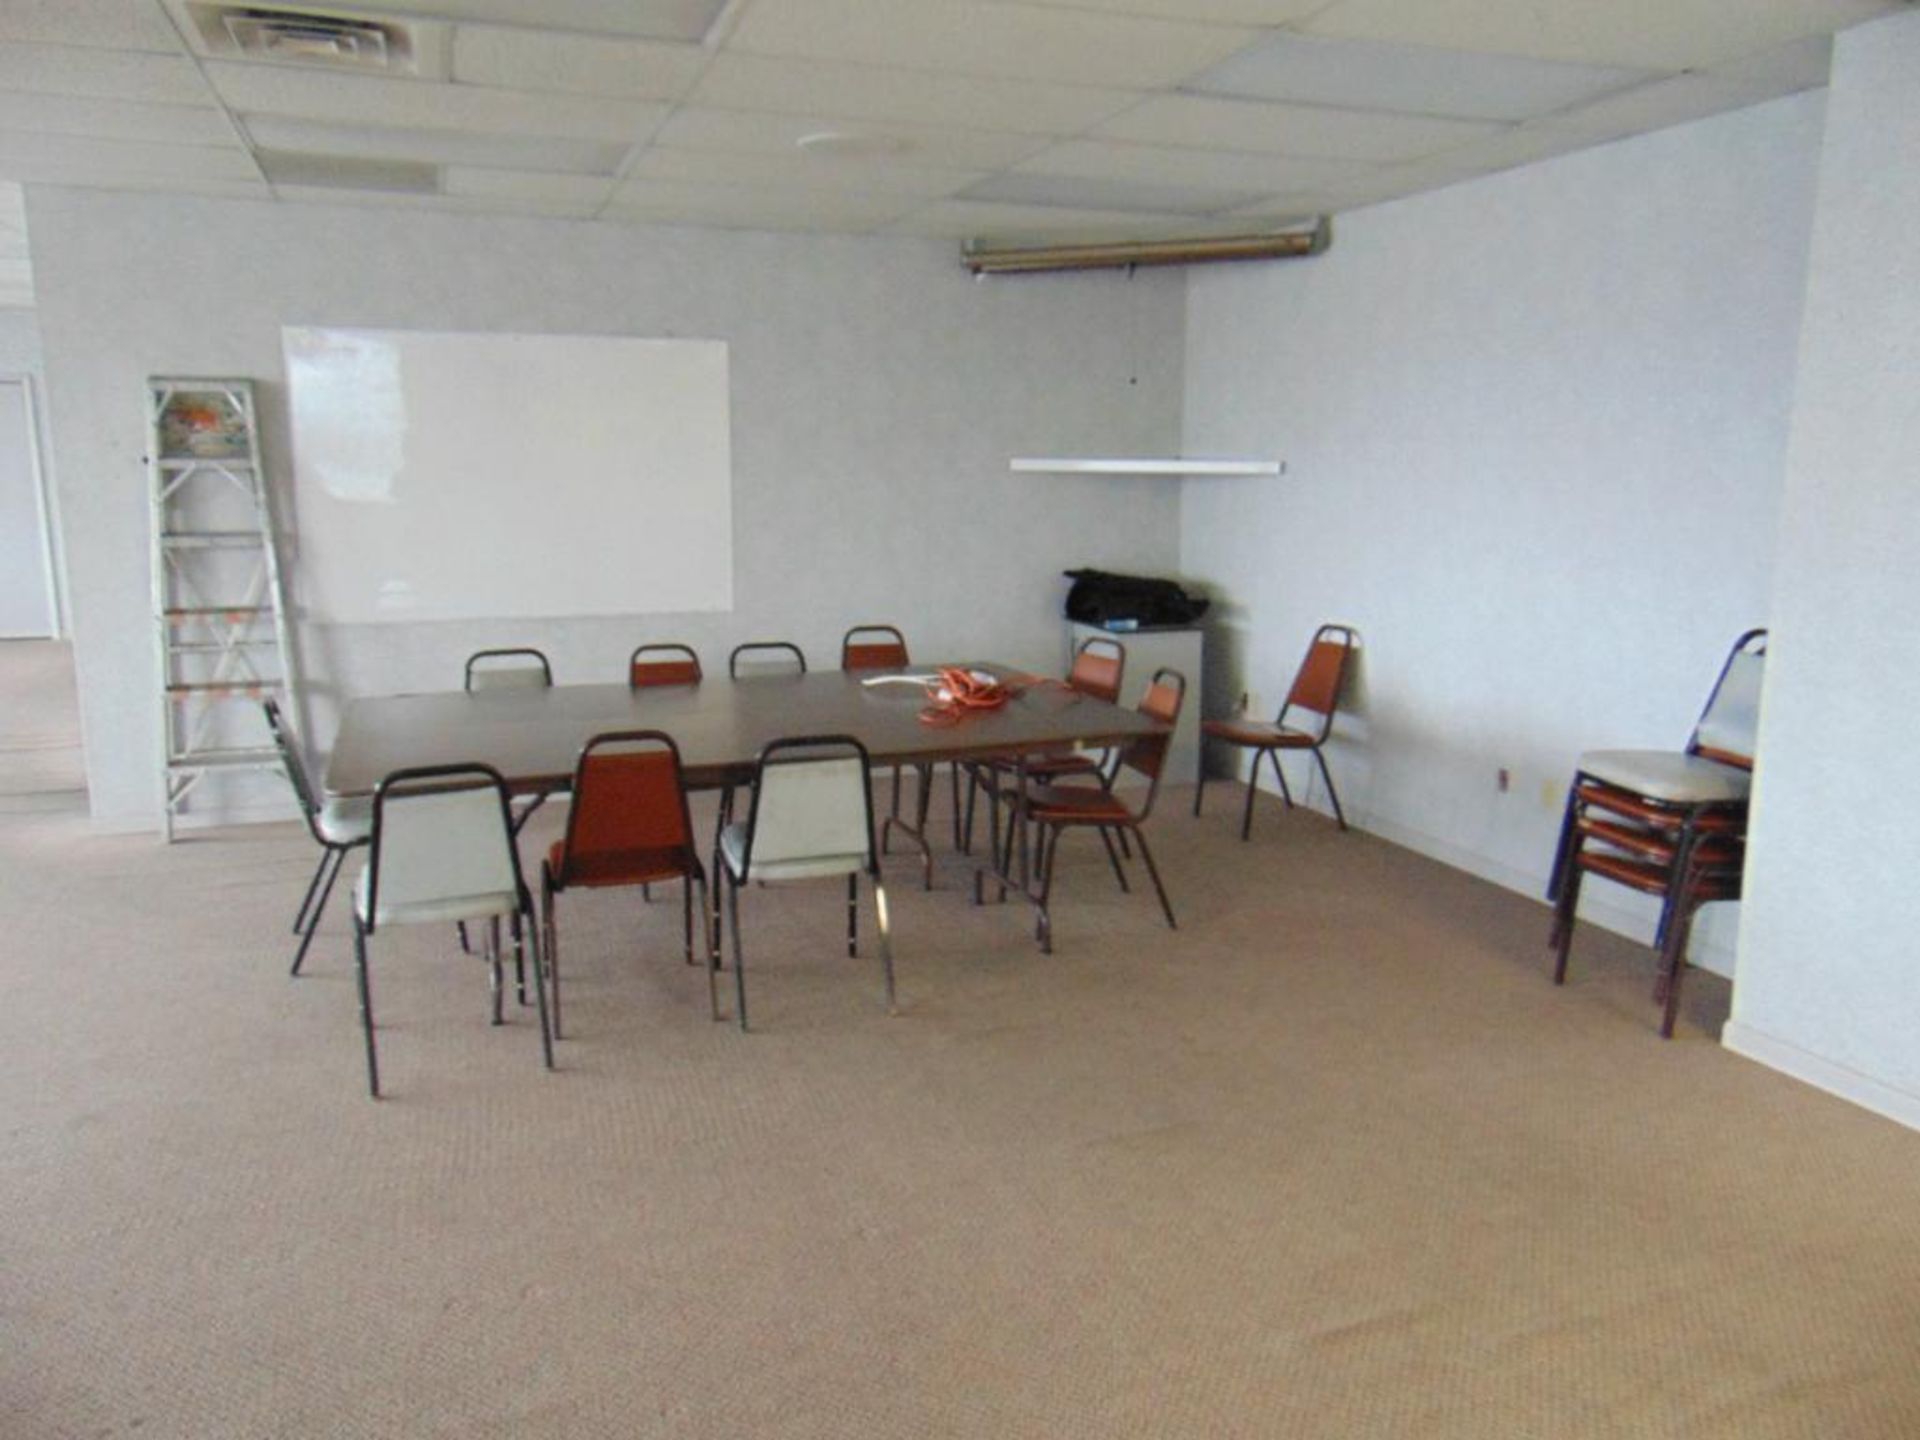 Conference Room and Contents*